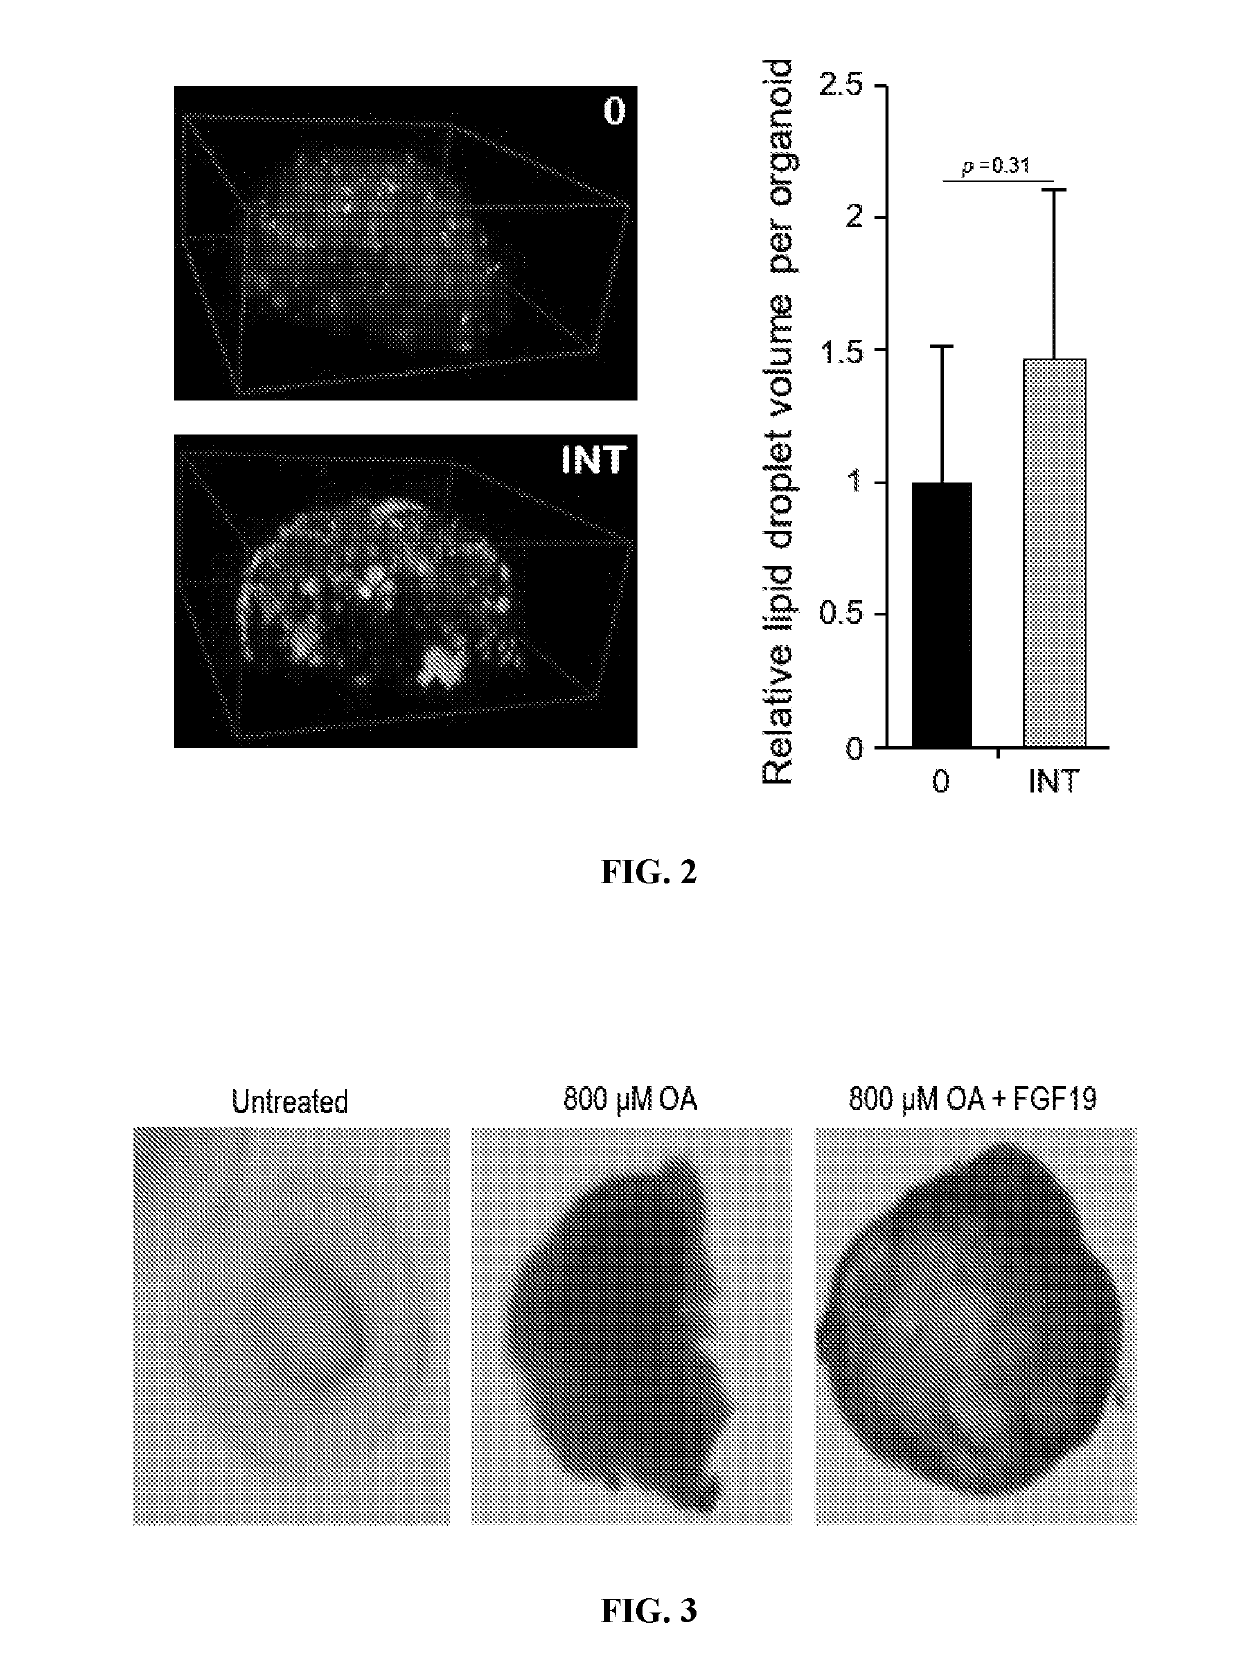 Compositions and methods of treating liver disease